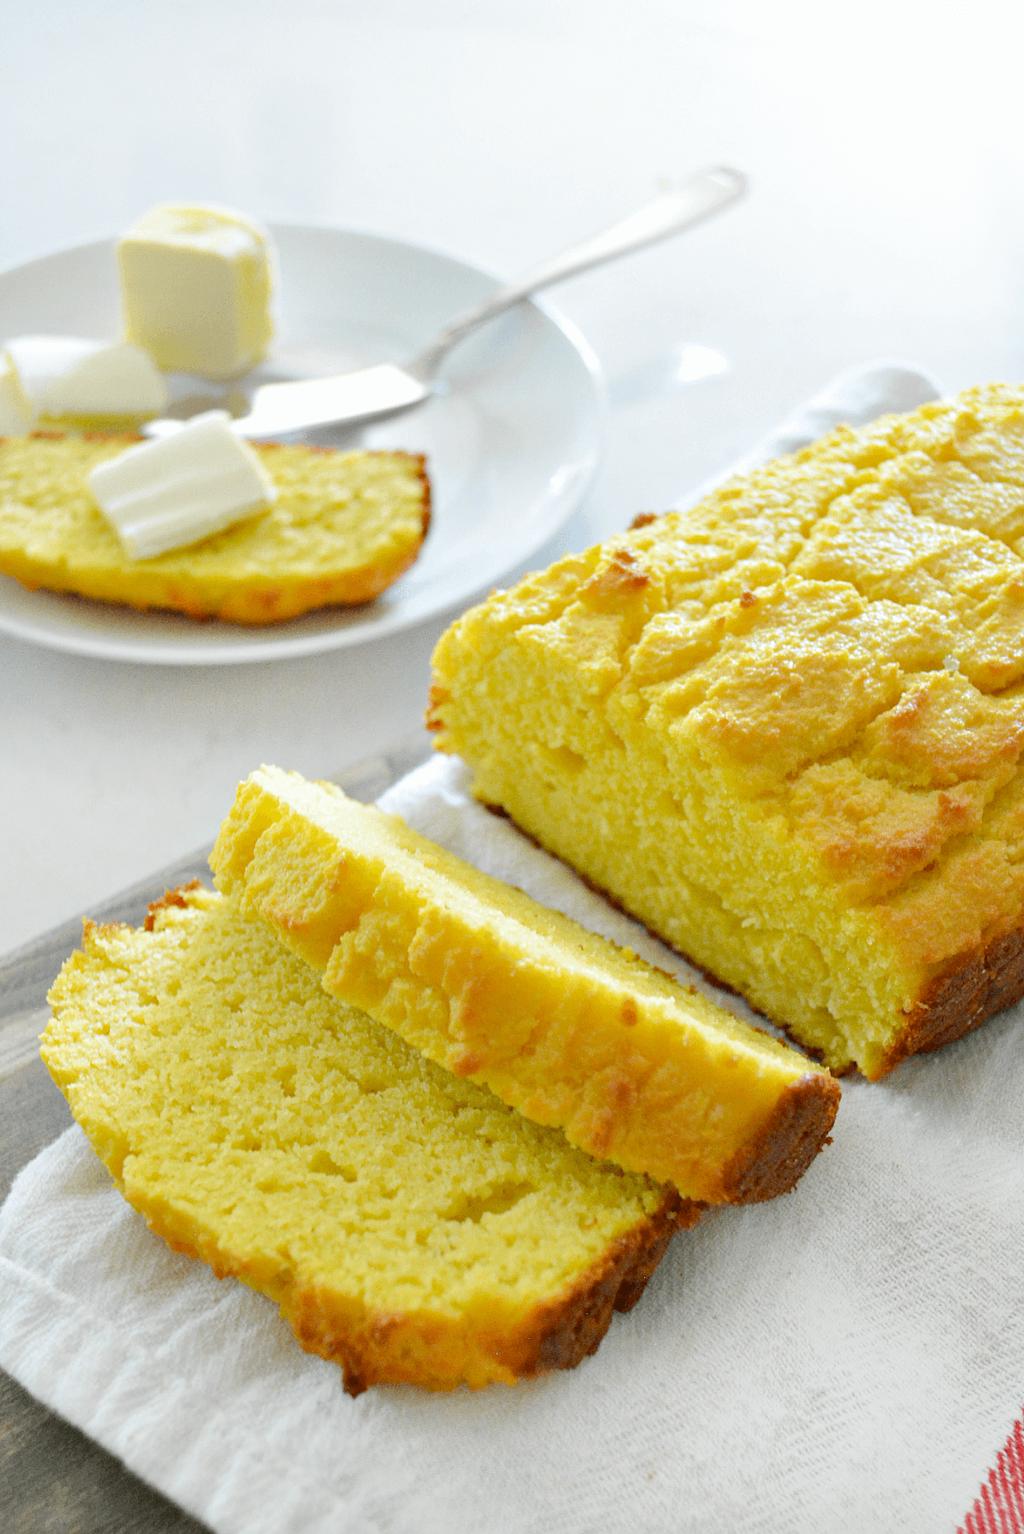 COCONUT FLOUR Bread Prep Time: 20 minutes Cook Time: 30 minutes Yield: 16 slices ¾ cup coconut flour ½ C tapioca flour 6 pasture raised eggs ½ C grass fed butter, melted and cooled slightly 1 T pure